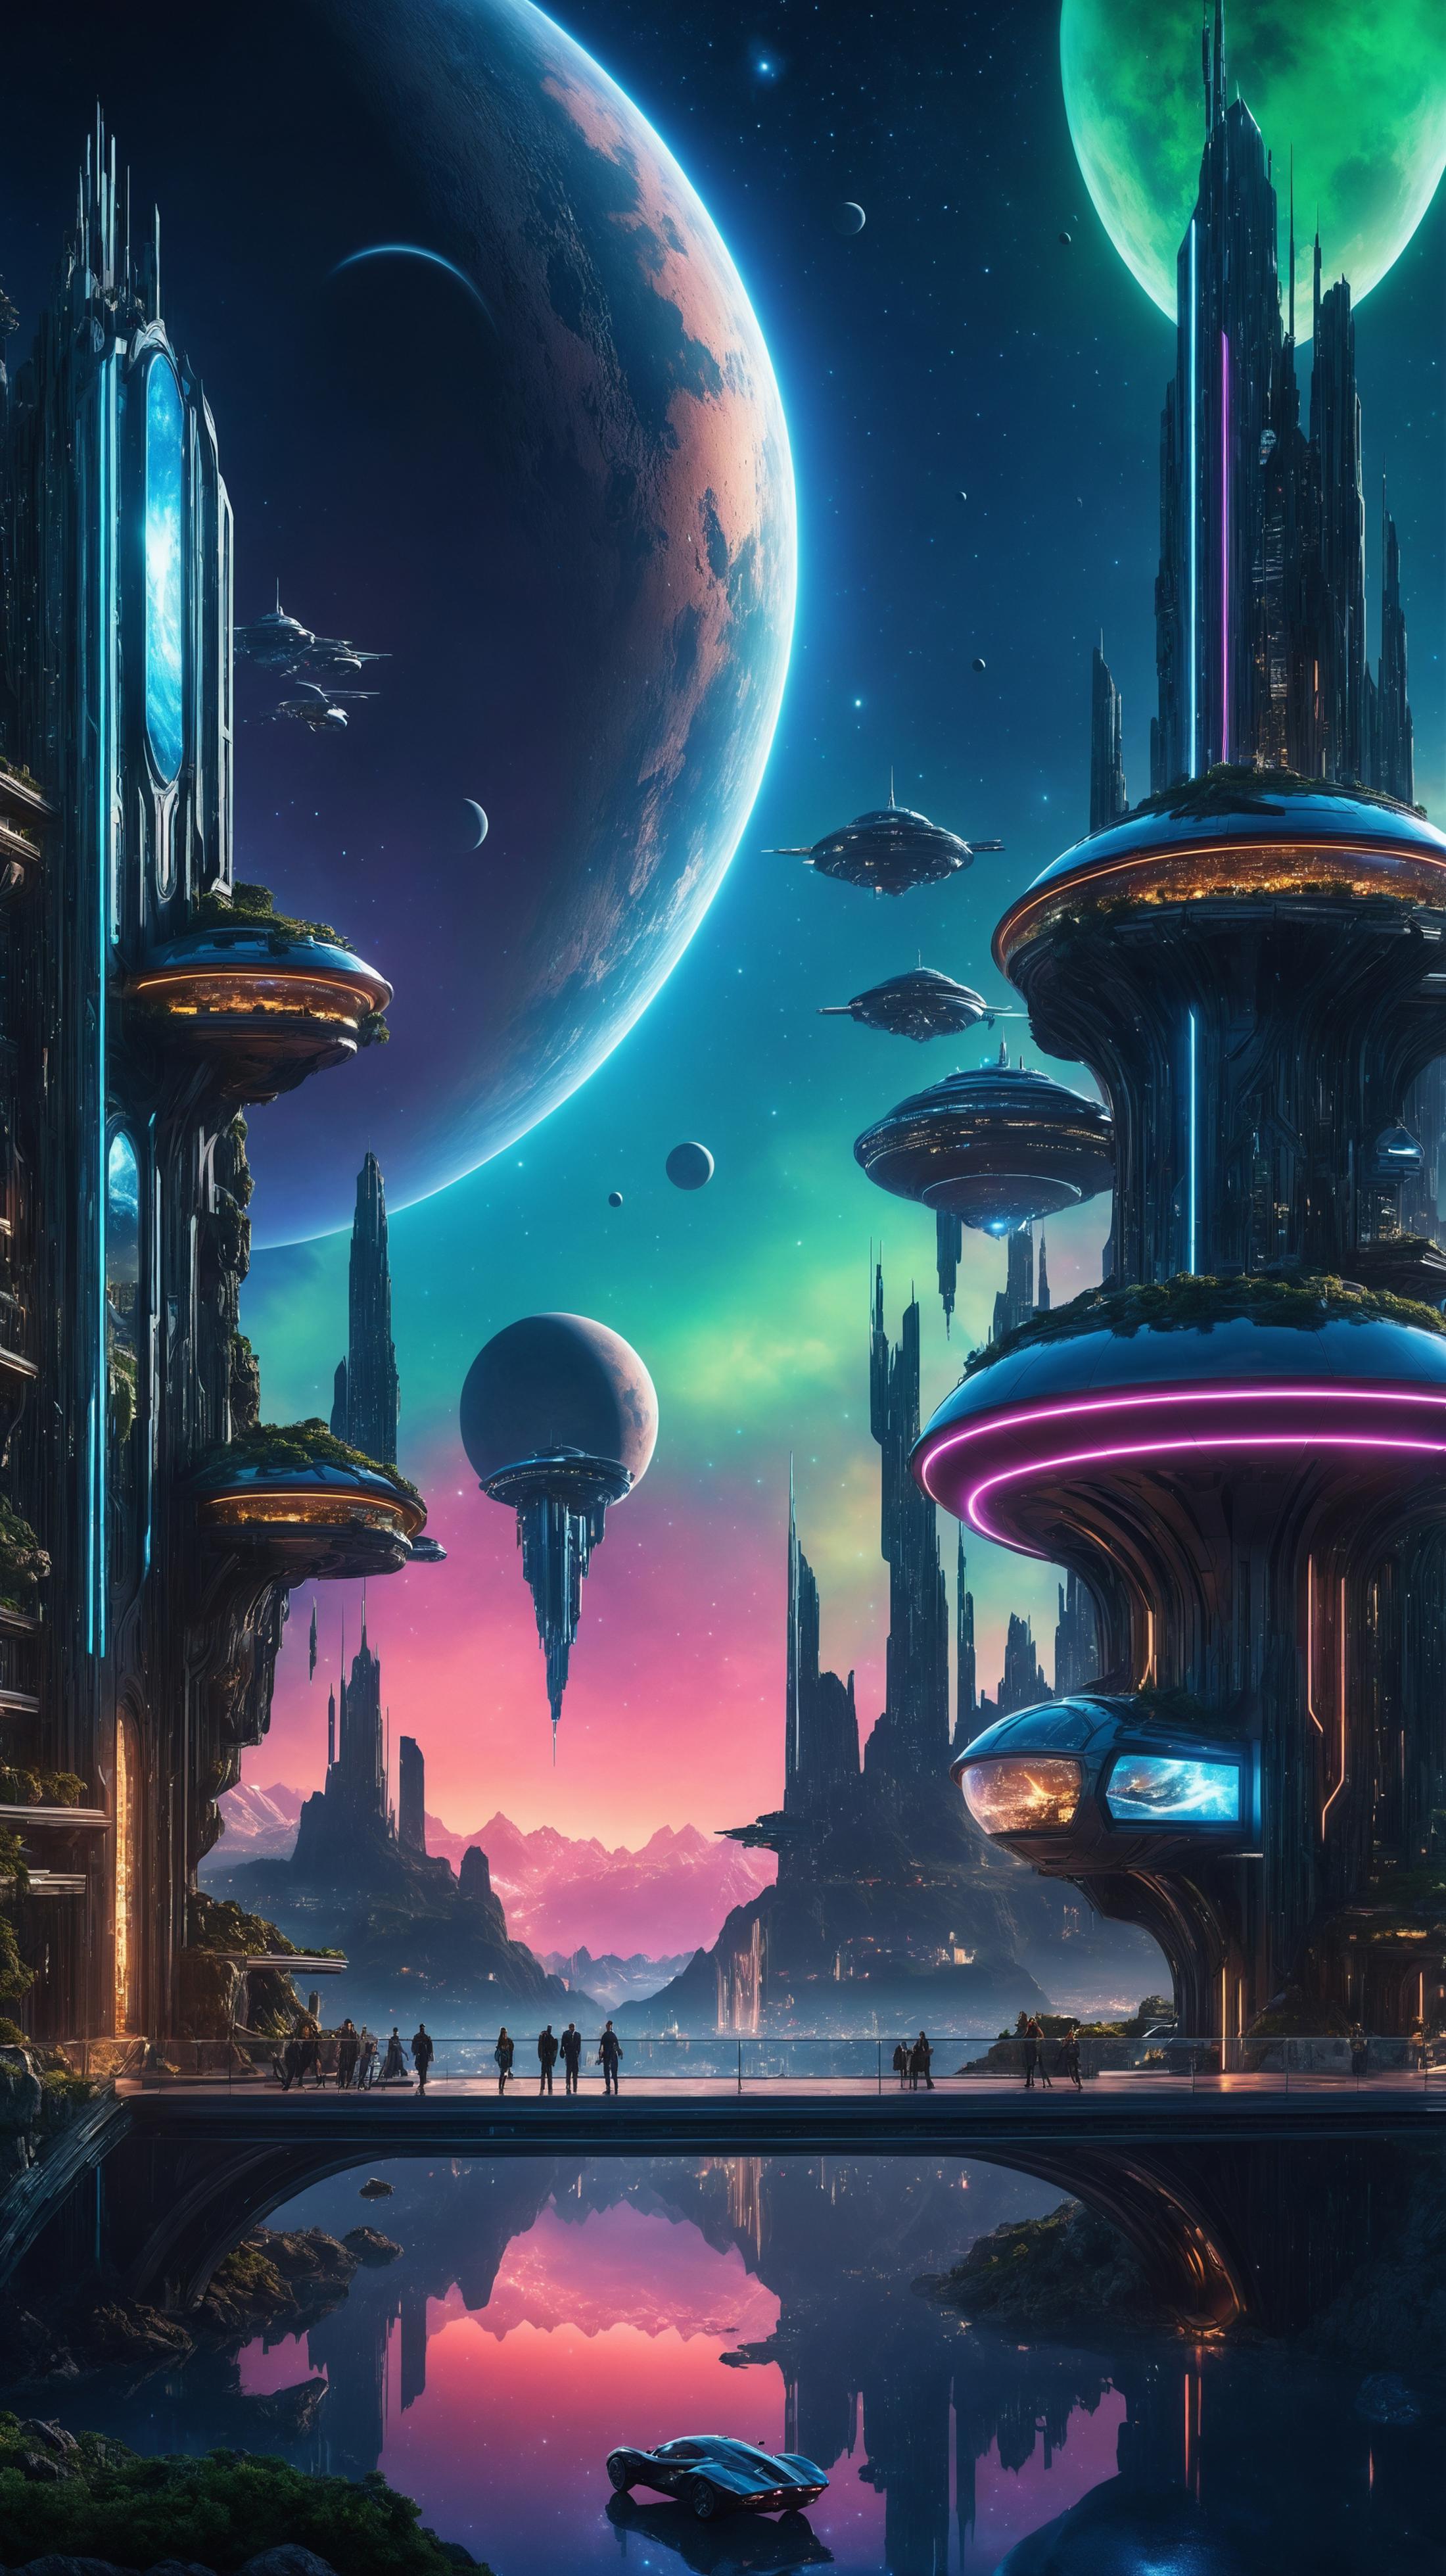 An Artistic Rendering of a Futuristic Space City with Several Alien Spacecrafts and Towers